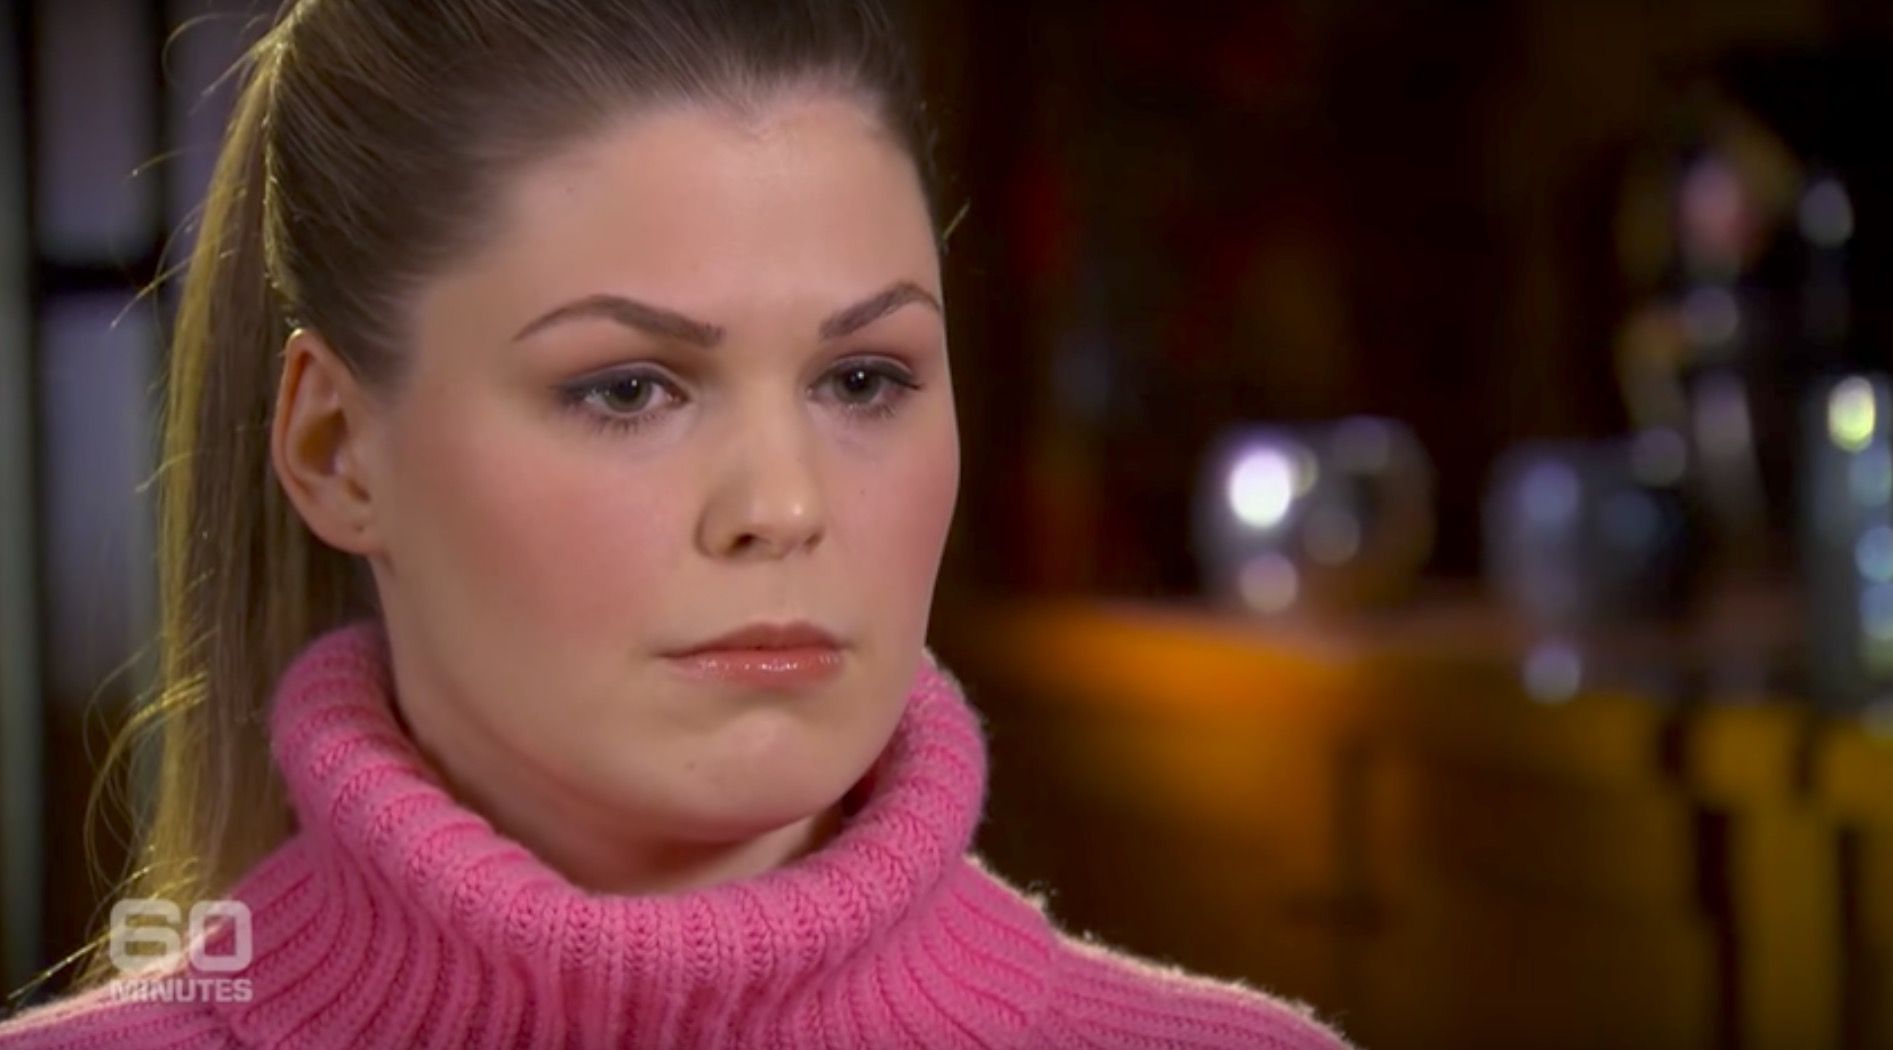 The wellness blogger who lied for years about having cancer has been fined a LOT of money